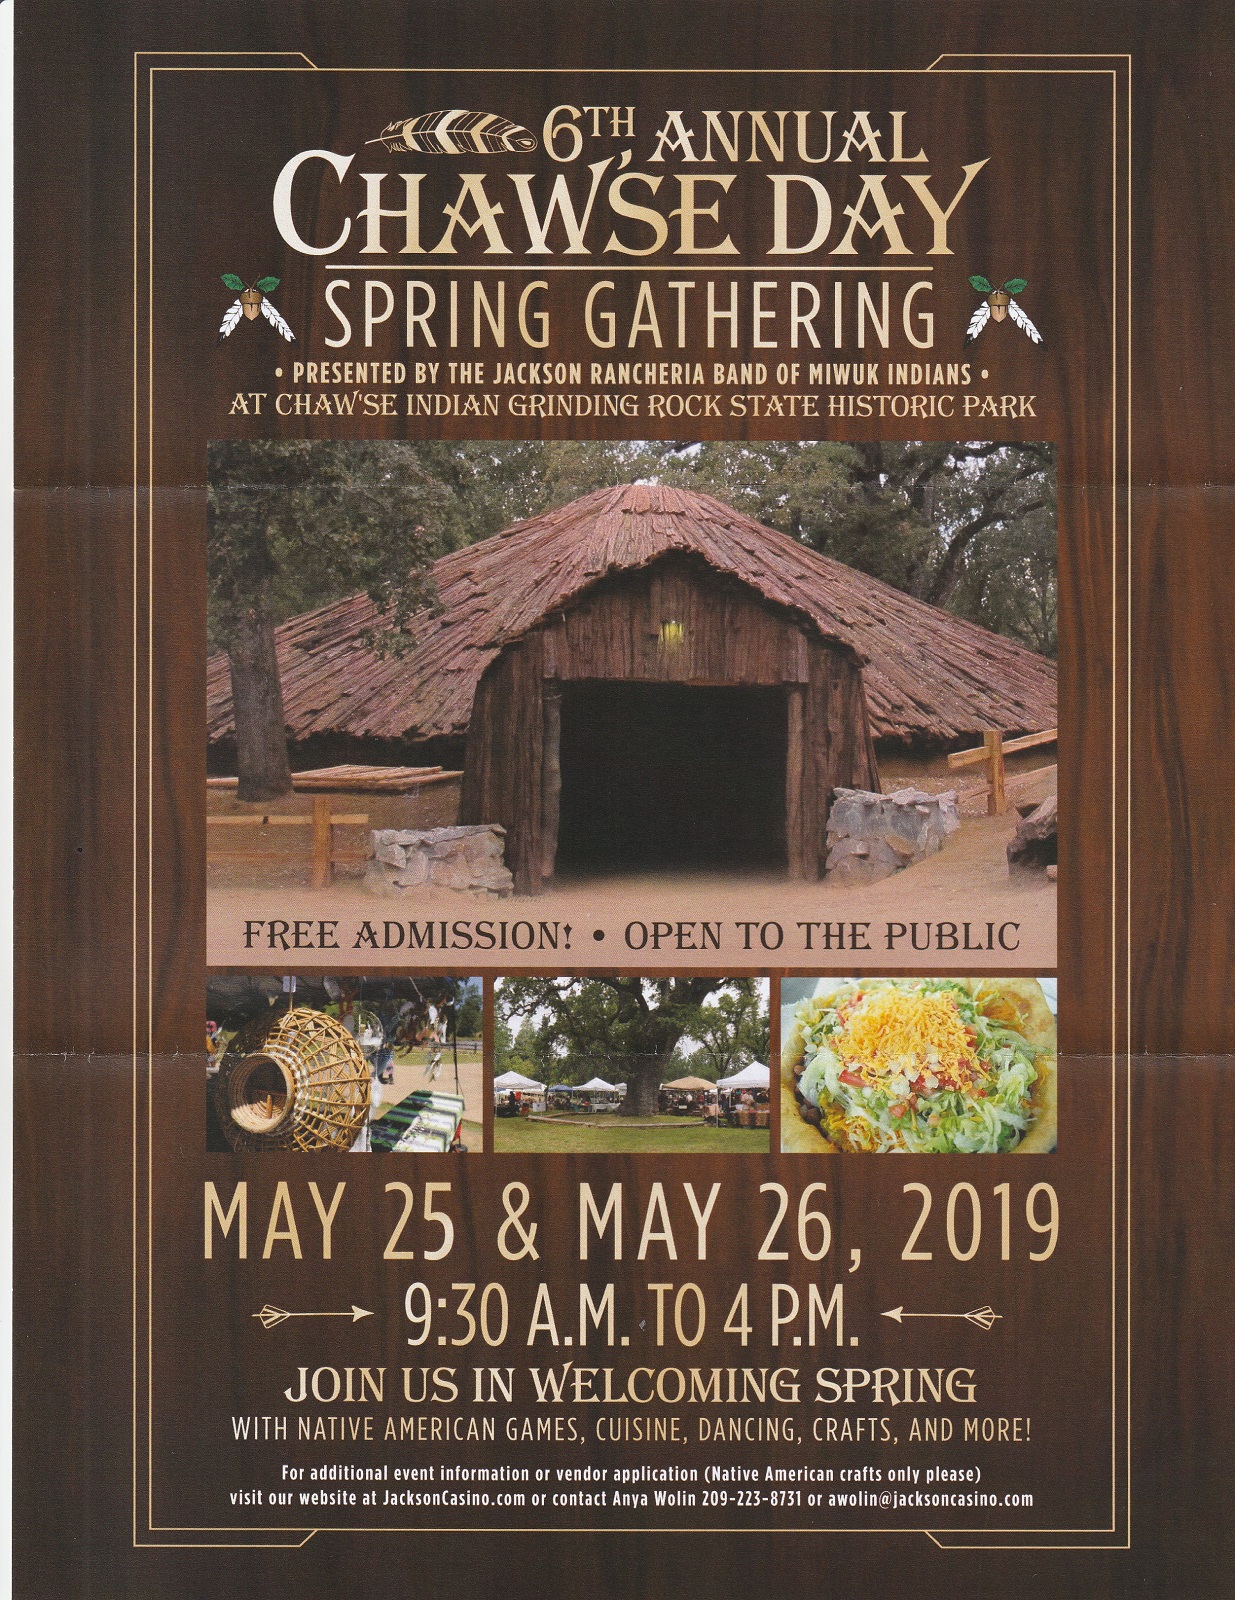 6th, Annual Chaw'se Day Spring Gathering, May 26th-27th, Pine Grove, Ca.